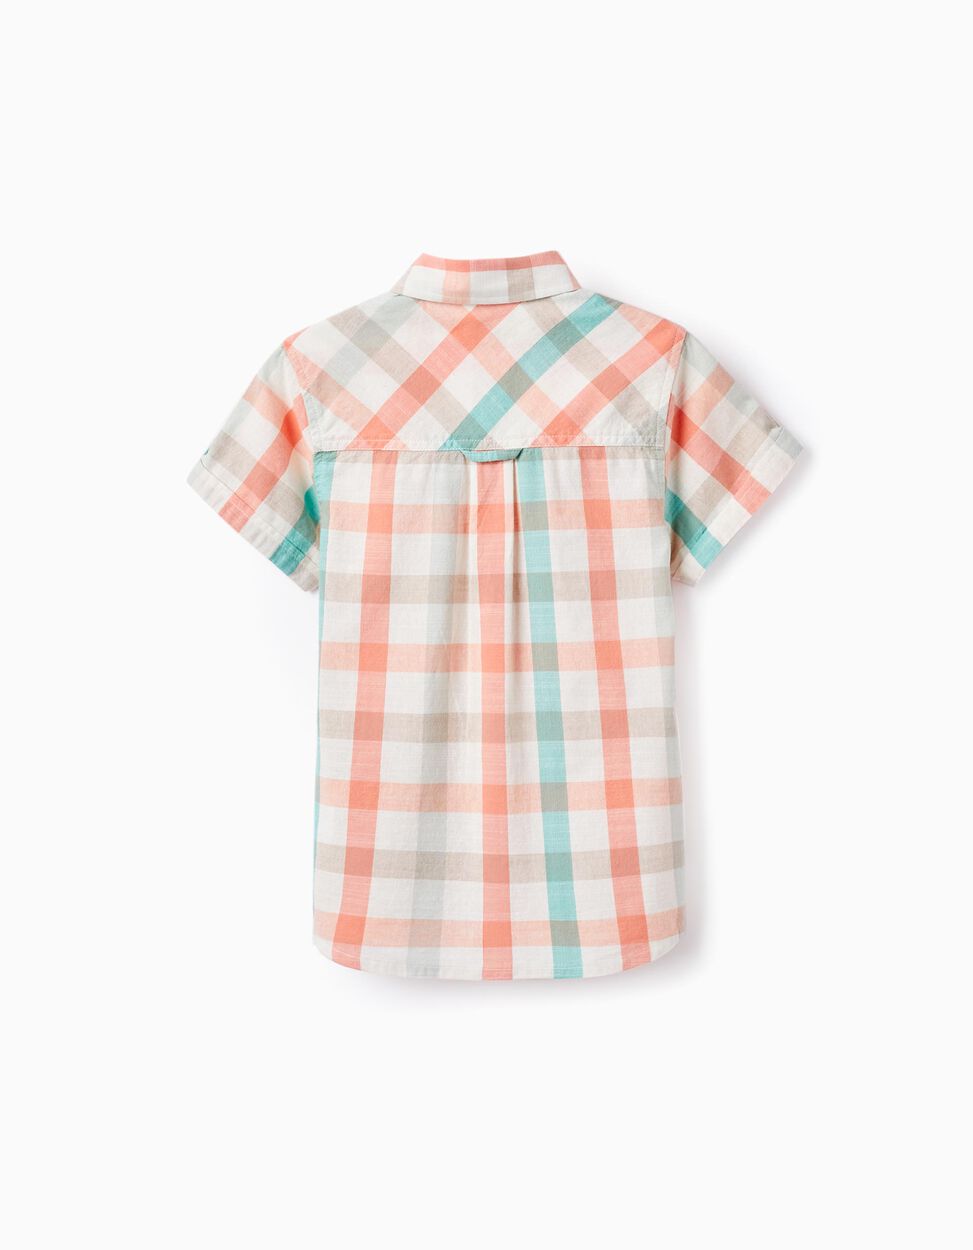 Buy Online Checked Shirt in Cotton for Boys 'B&S', Aqua Green/Coral